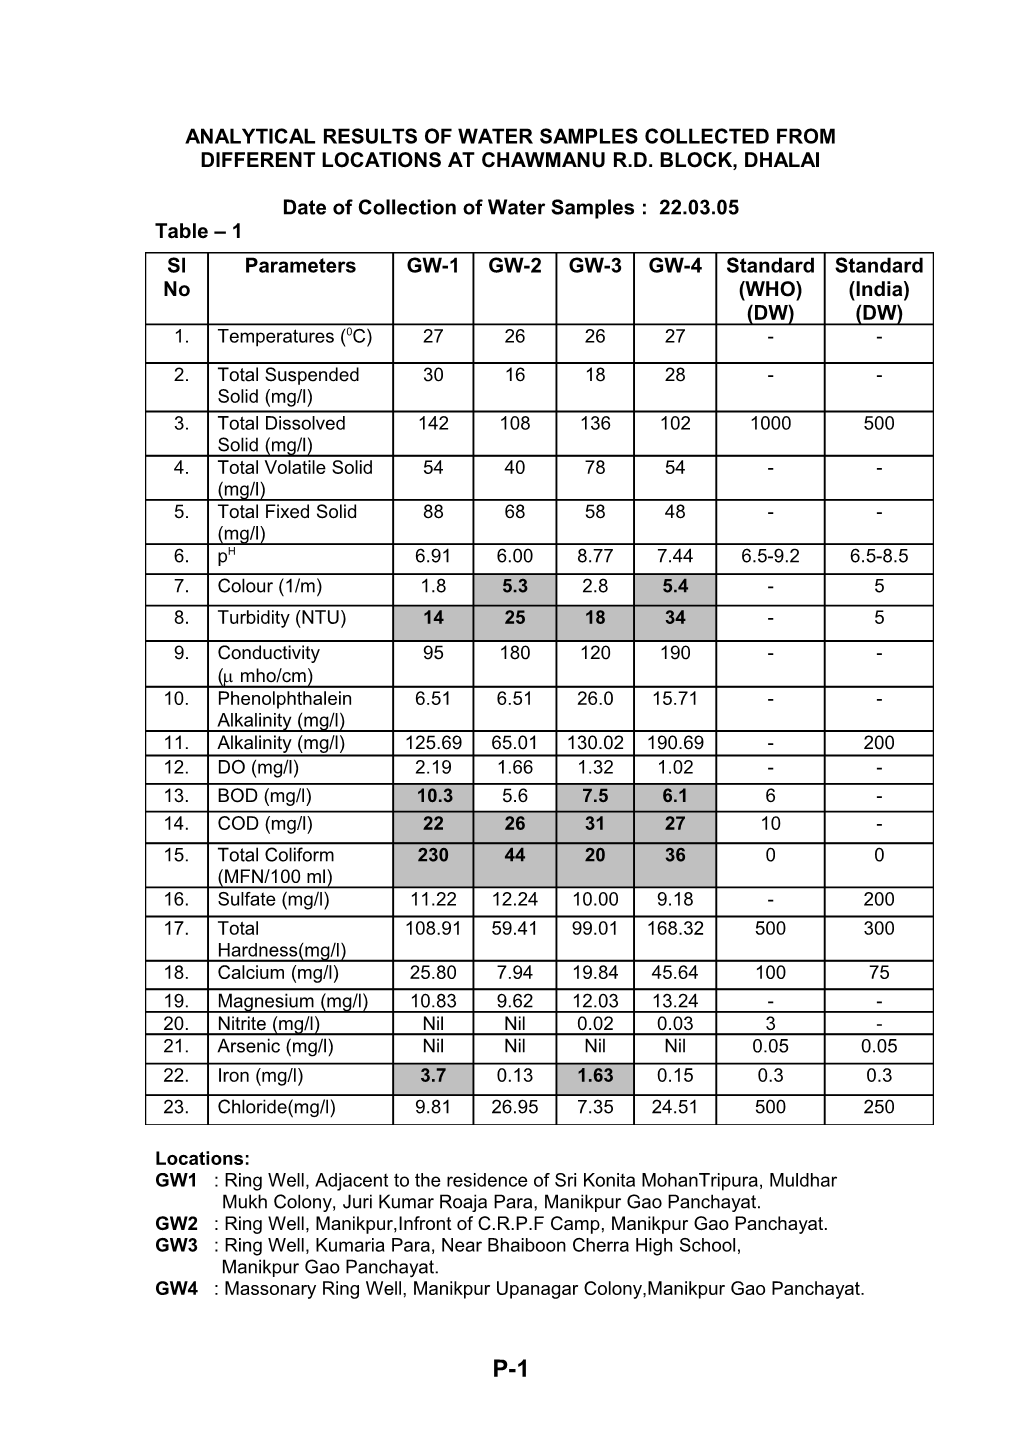 Analytical Results of Water Samples Collected from Different Locations at Chawmanu R